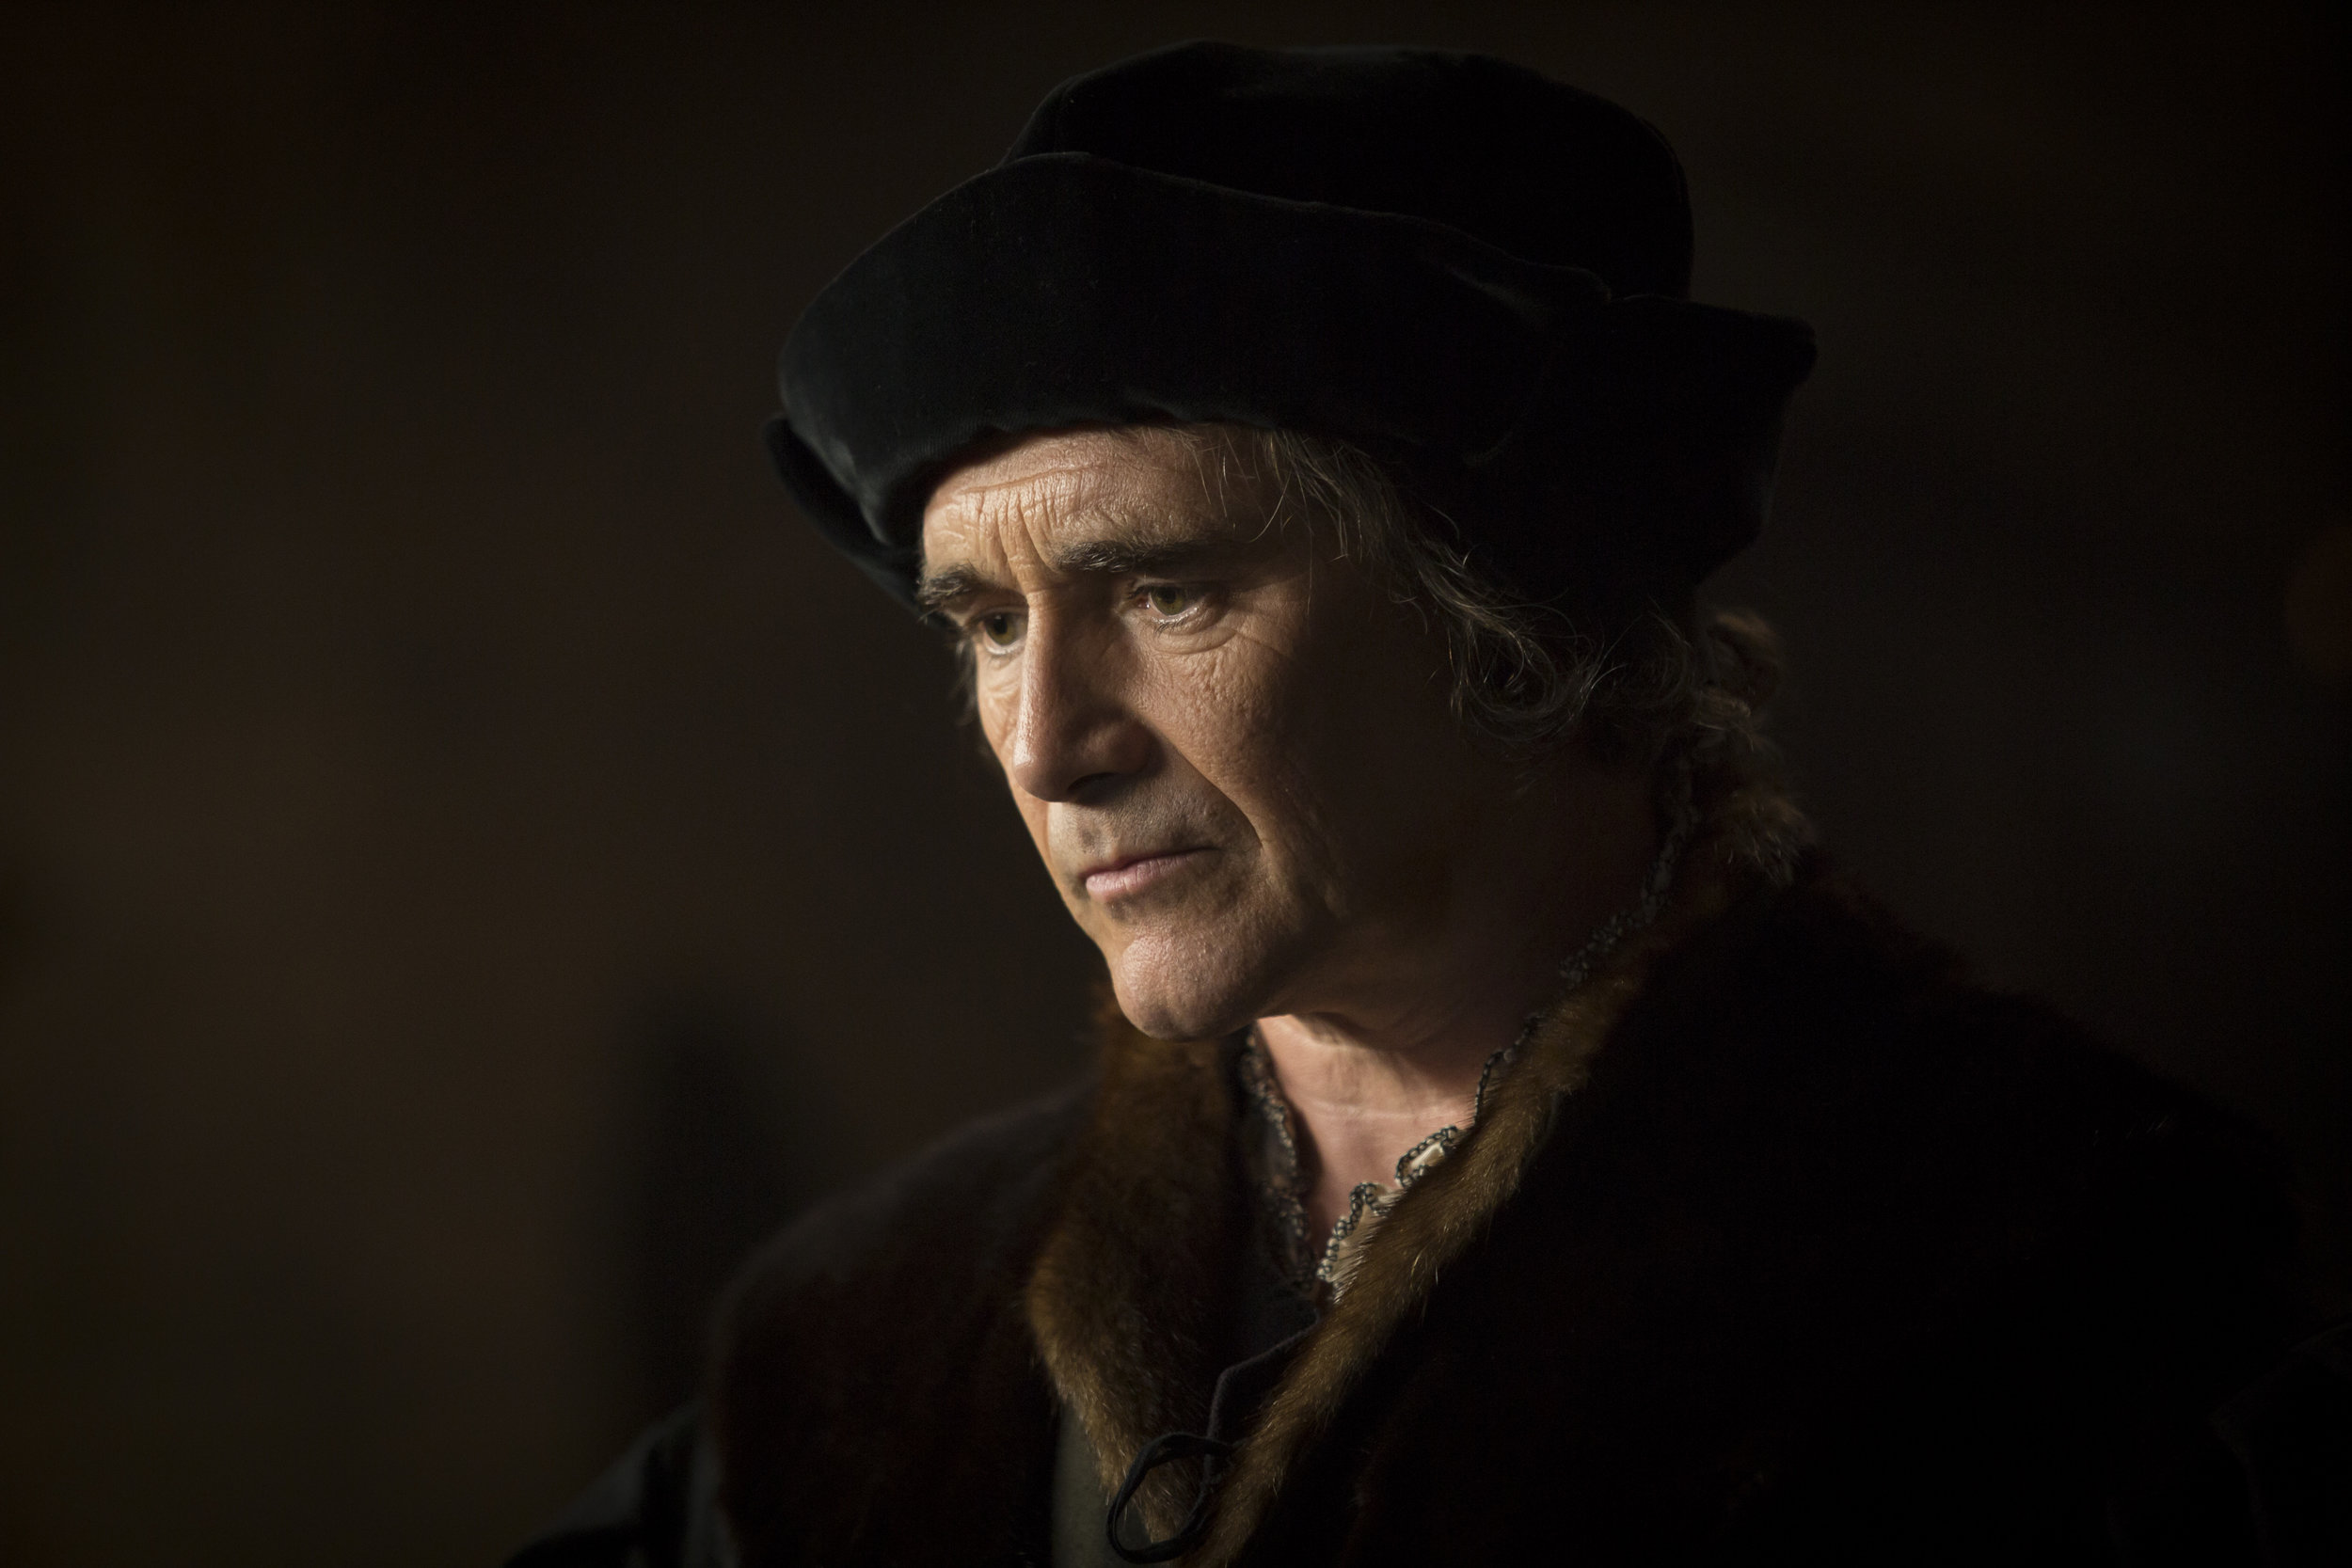   WOLF HALL  ”Quite simply, a masterpiece”  The London Times  